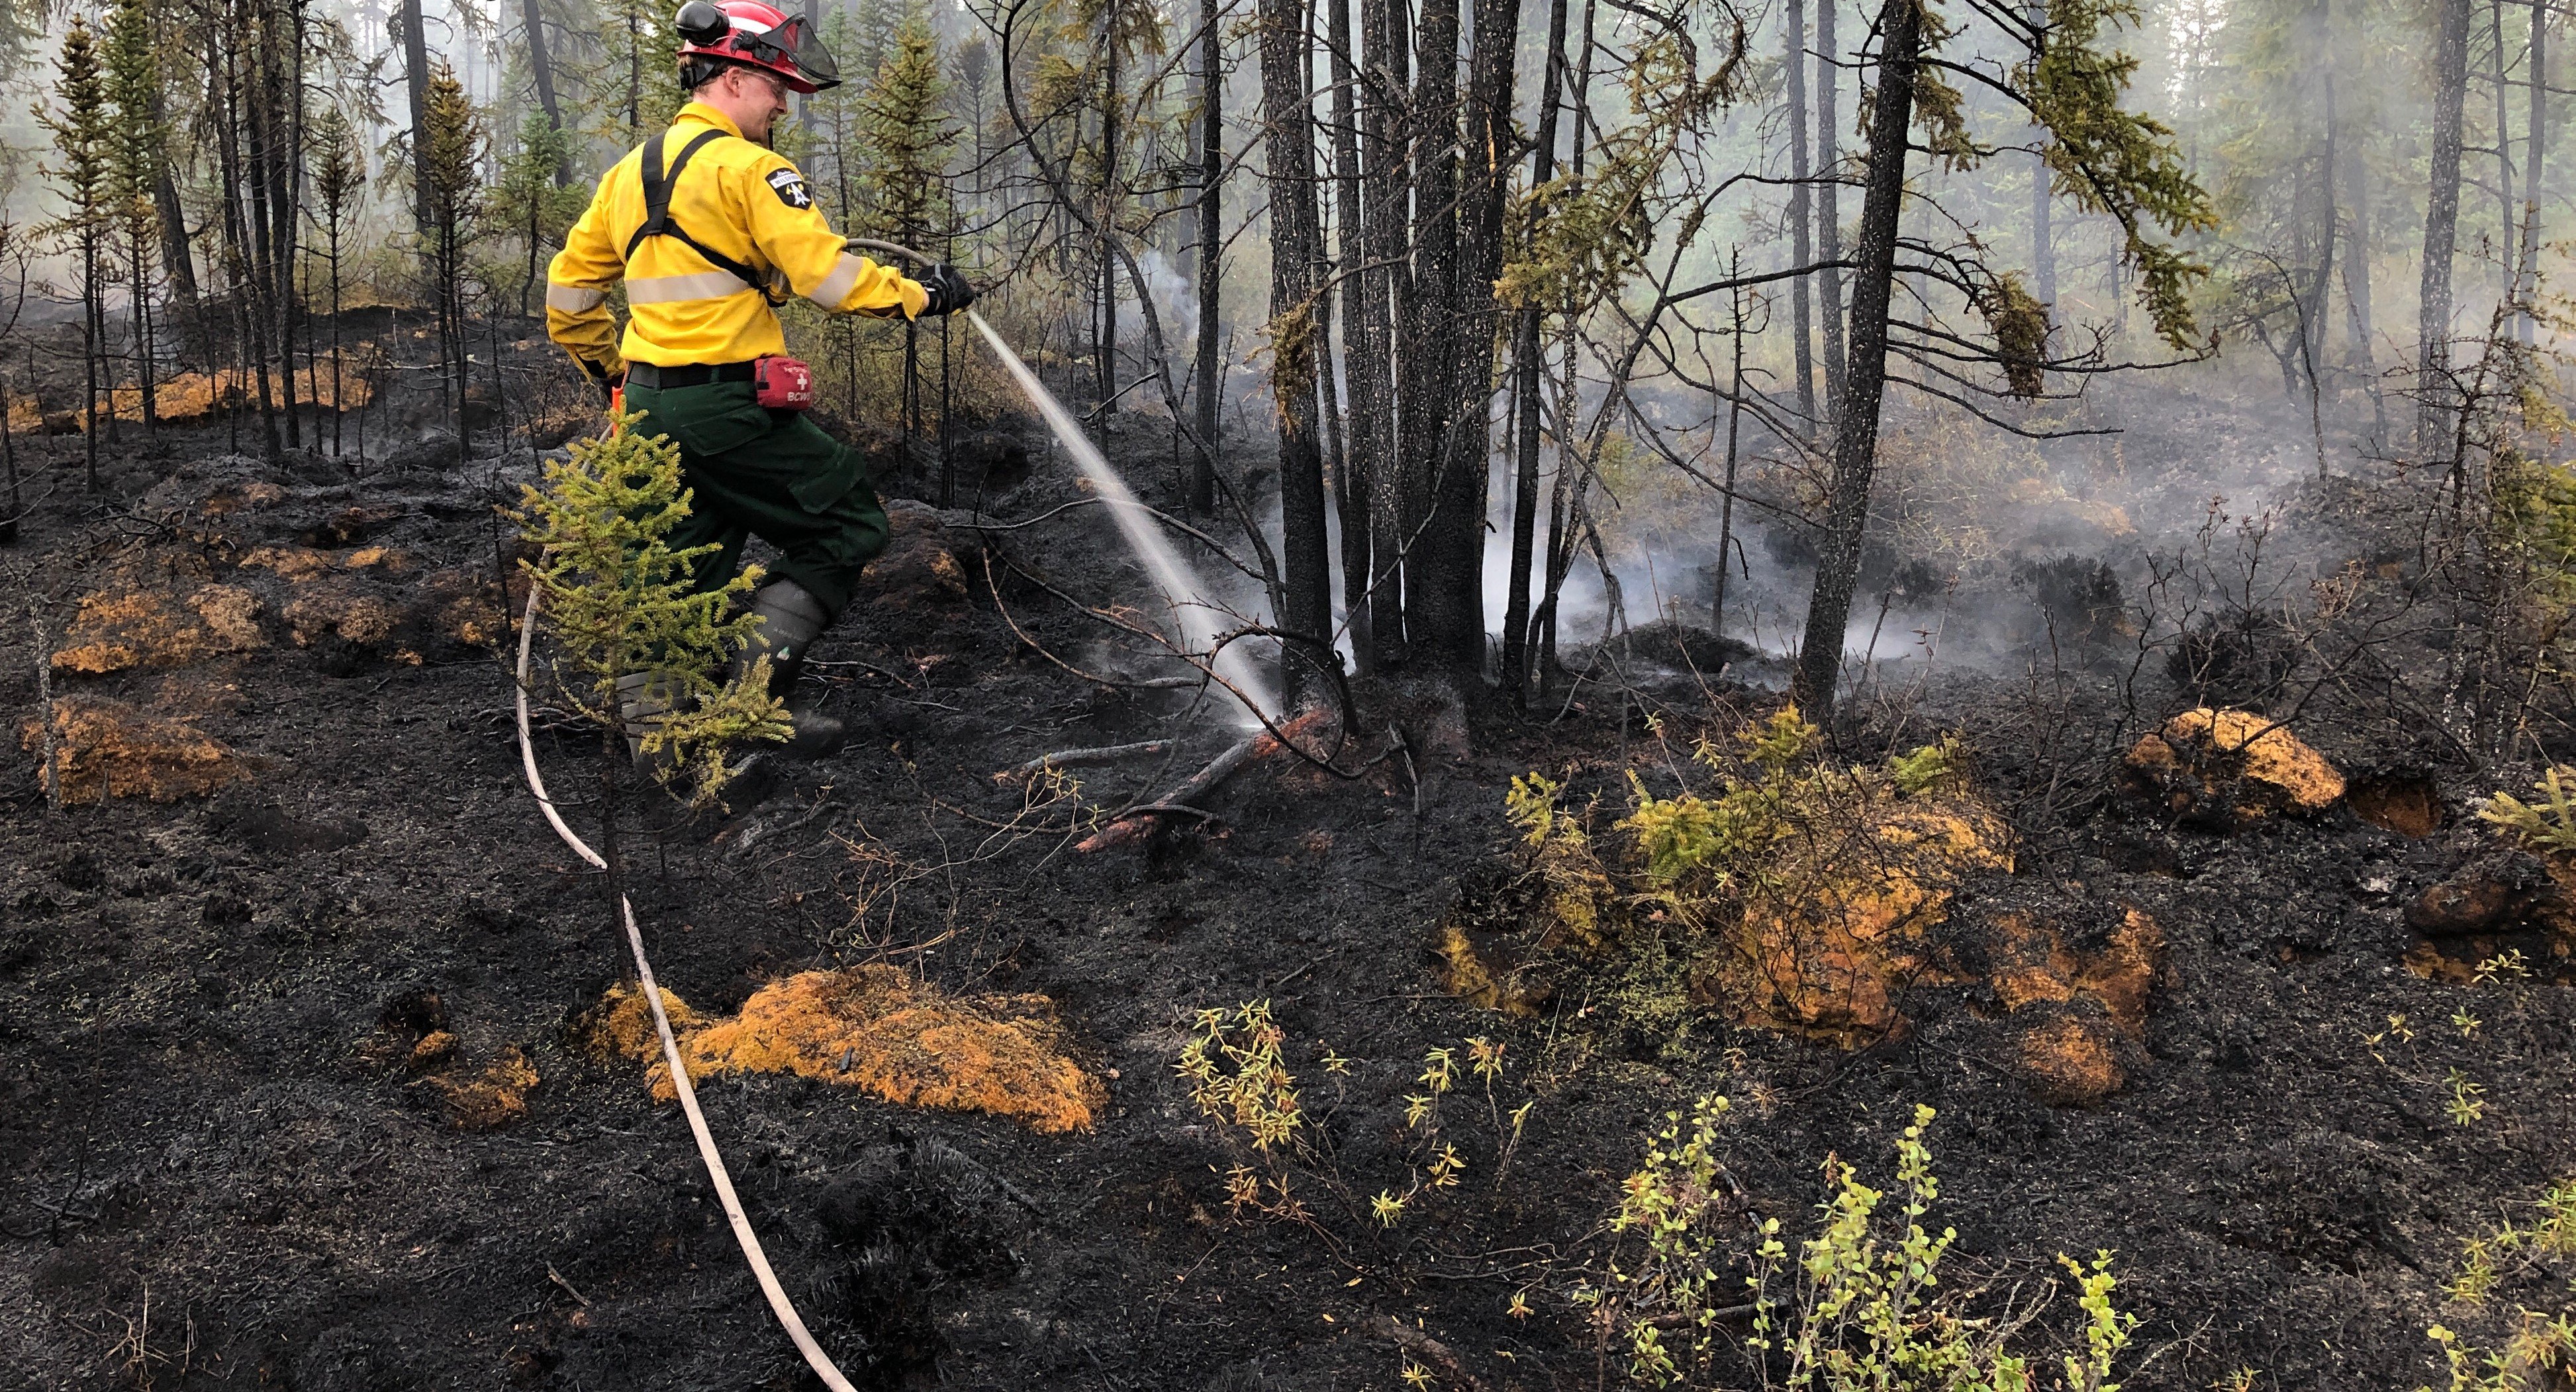 firefighter working on ground fire 2021 new patches 1